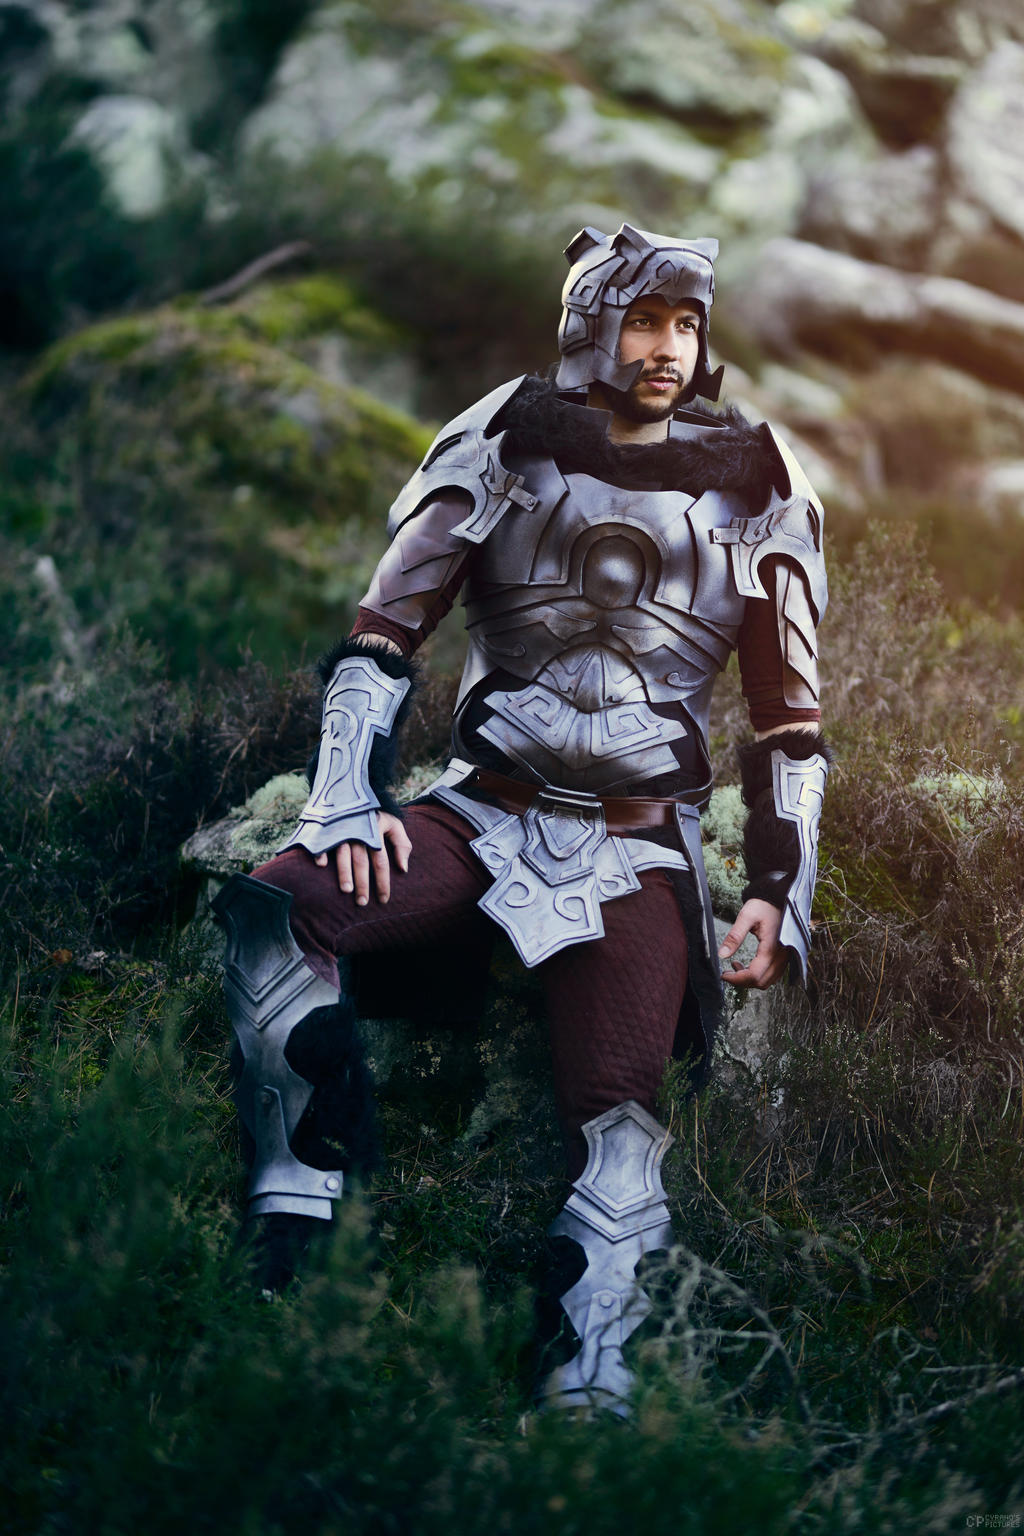 Rafflesia Arnoldi Occlusion second Nordic carved armor SKYRIM COSPLAY by Vector67 on DeviantArt